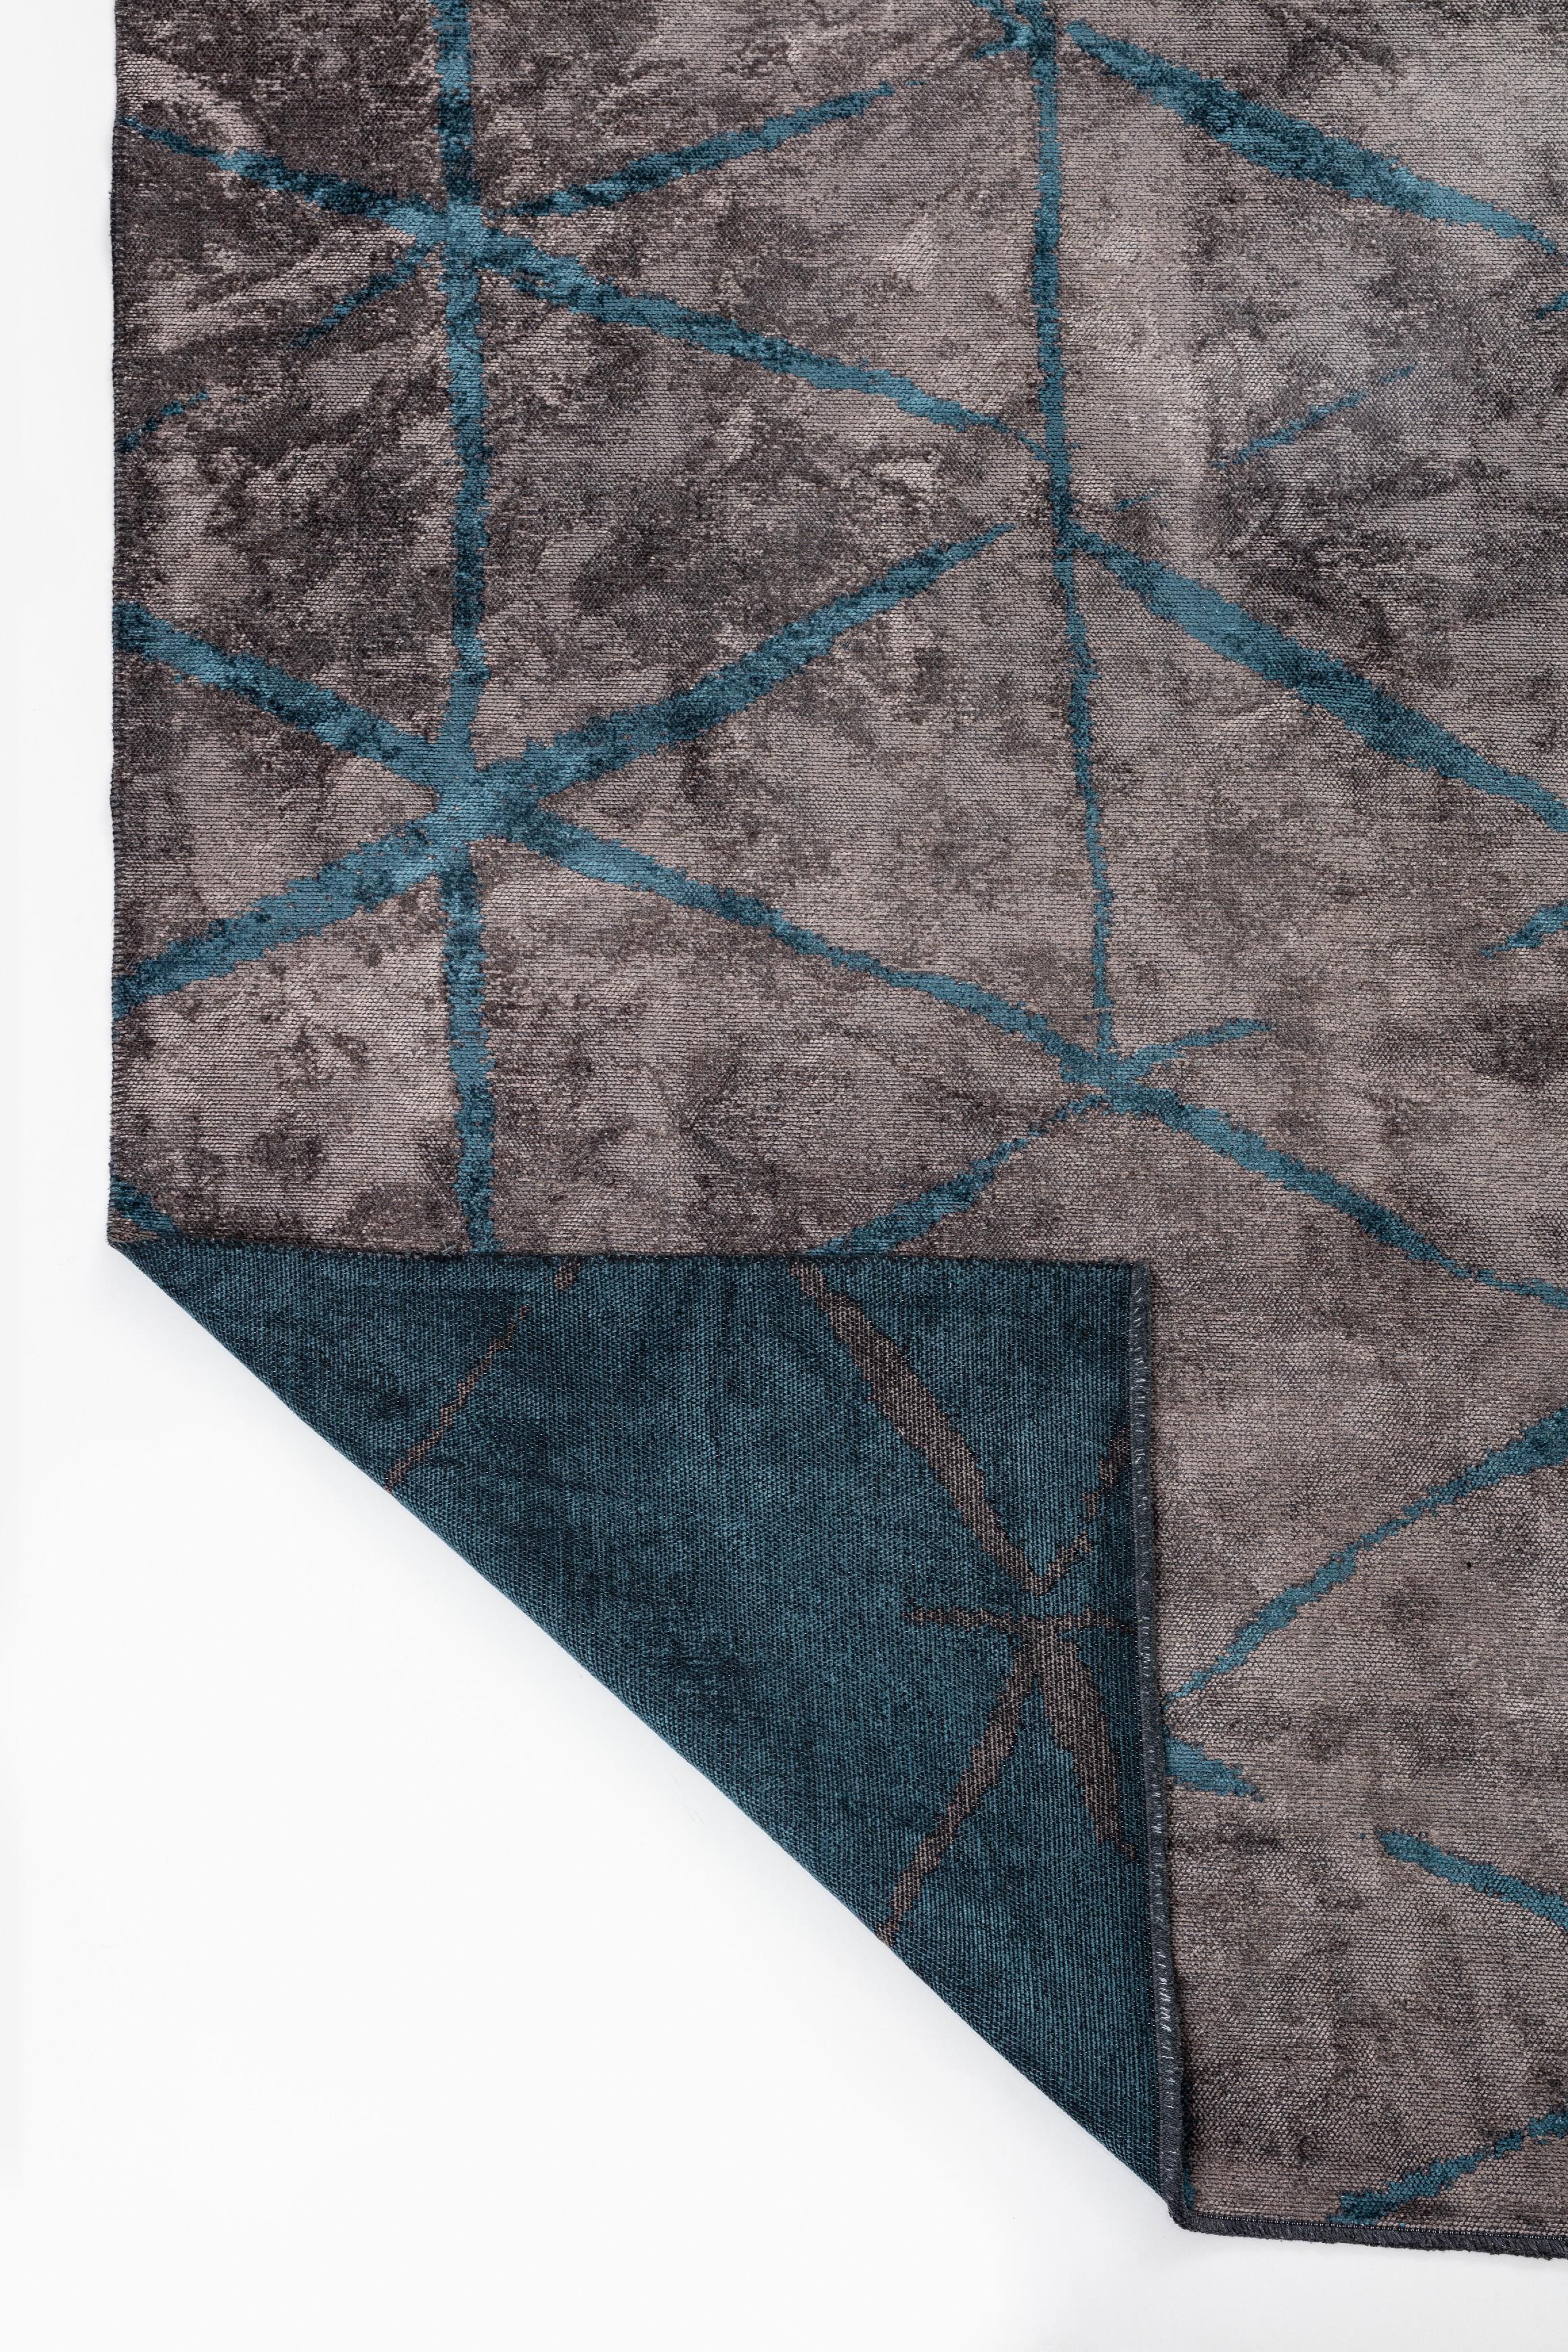 For Sale:  (Gray) Modern Abstract Luxury Hand-Finished Area Rug 3